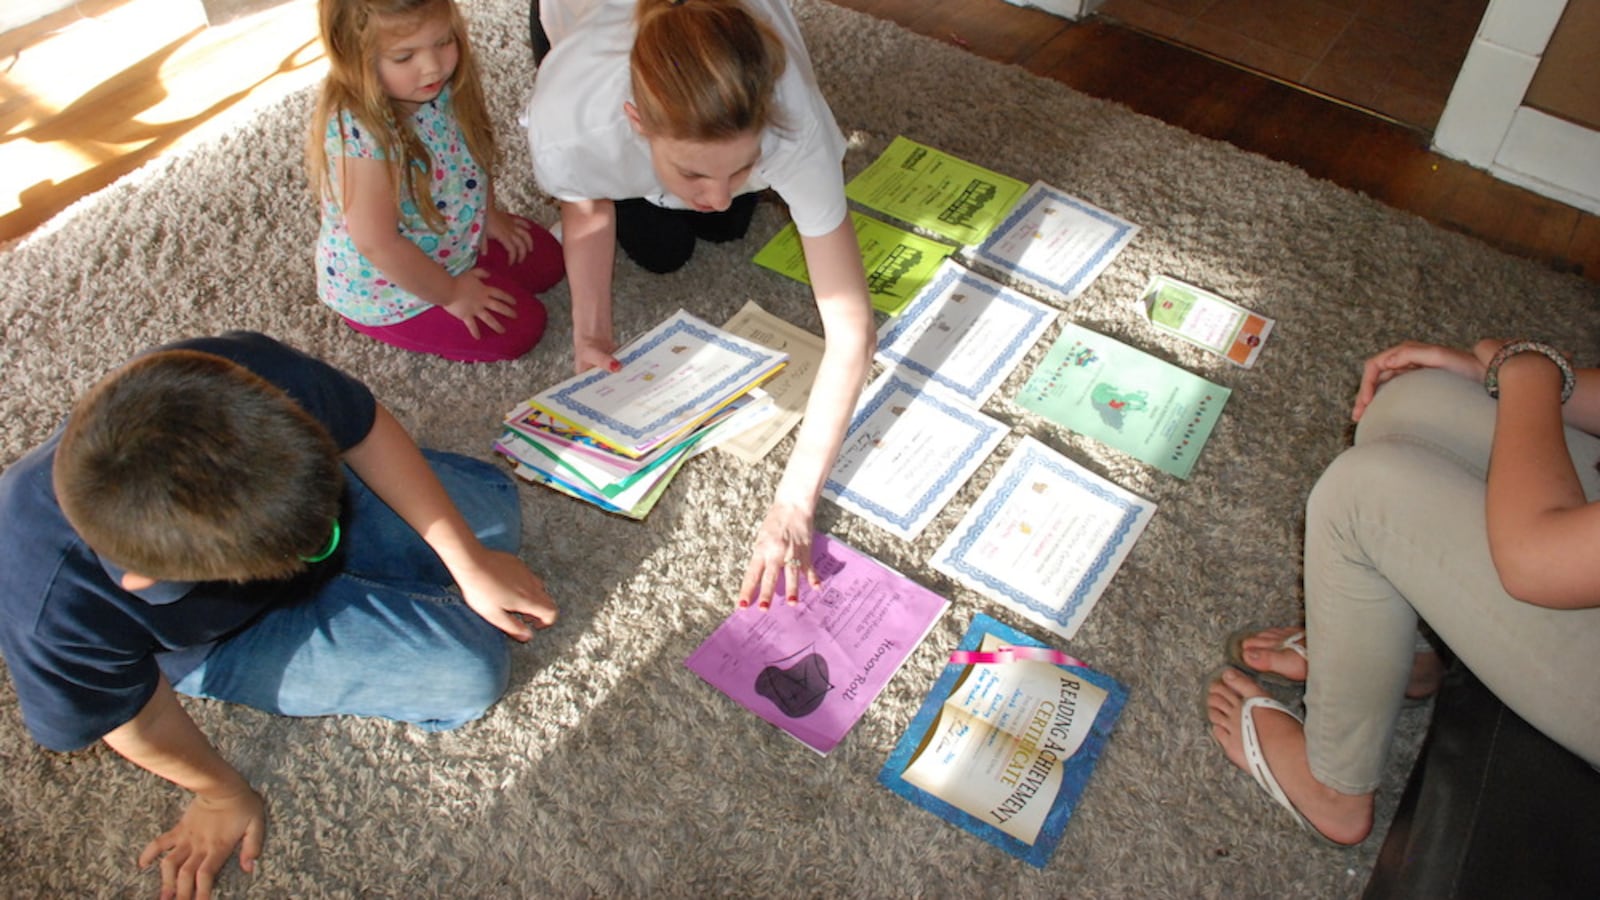 Julianne Williamson spreads out her children's academic awards from the Bessemer Academy in her living room in Pueblo. With her are her children Trinity, who will enter kindergarten this upcoming school year, Jacob, a third grader, and Ryane.